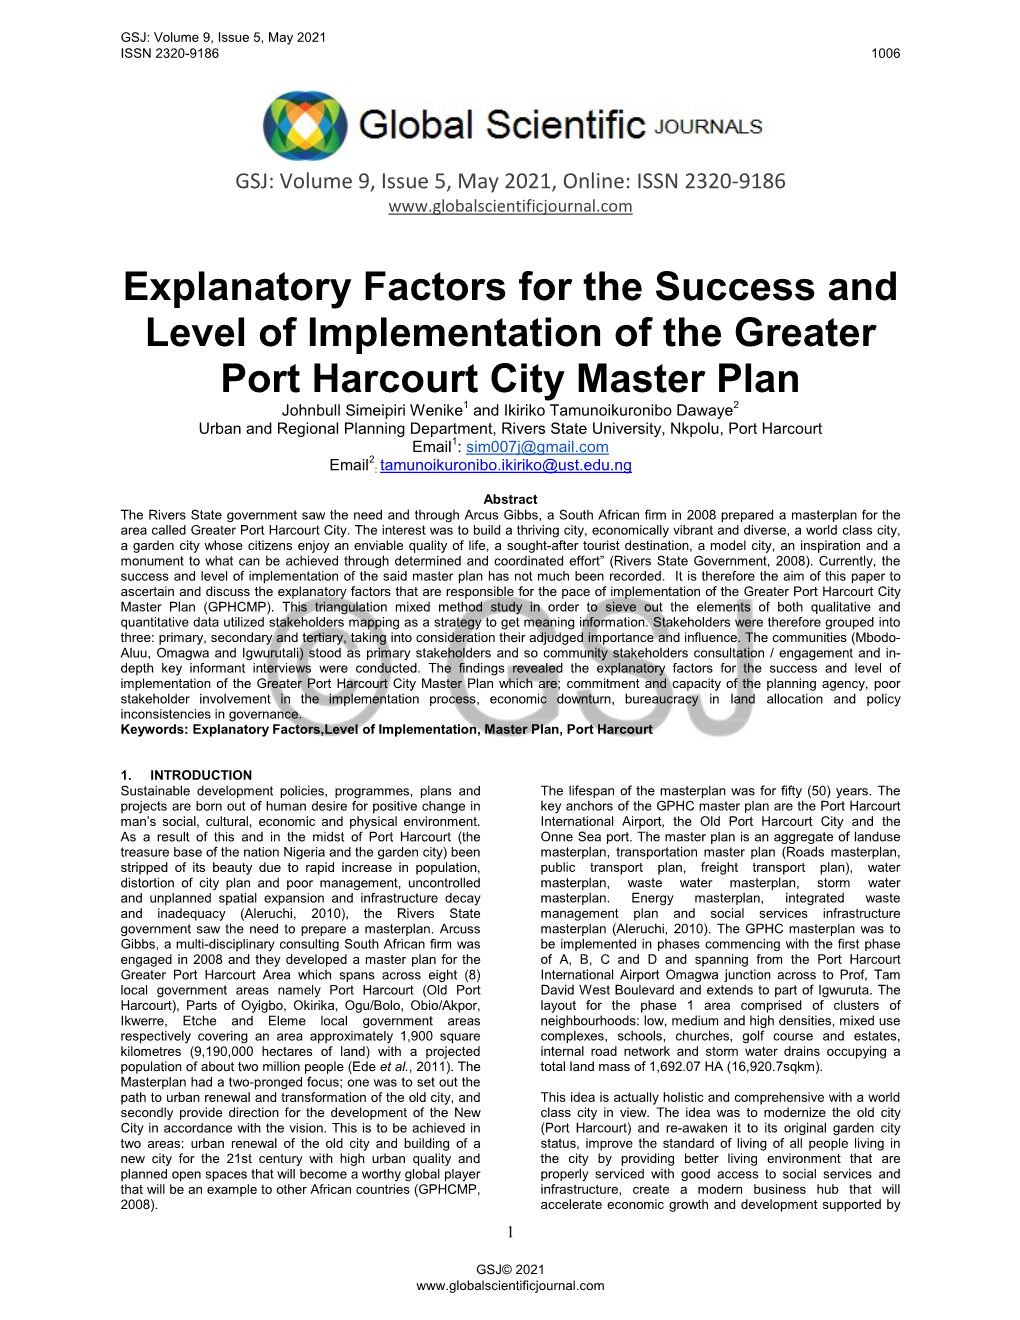 Explanatory Factors for the Success and Level of Implementation of The